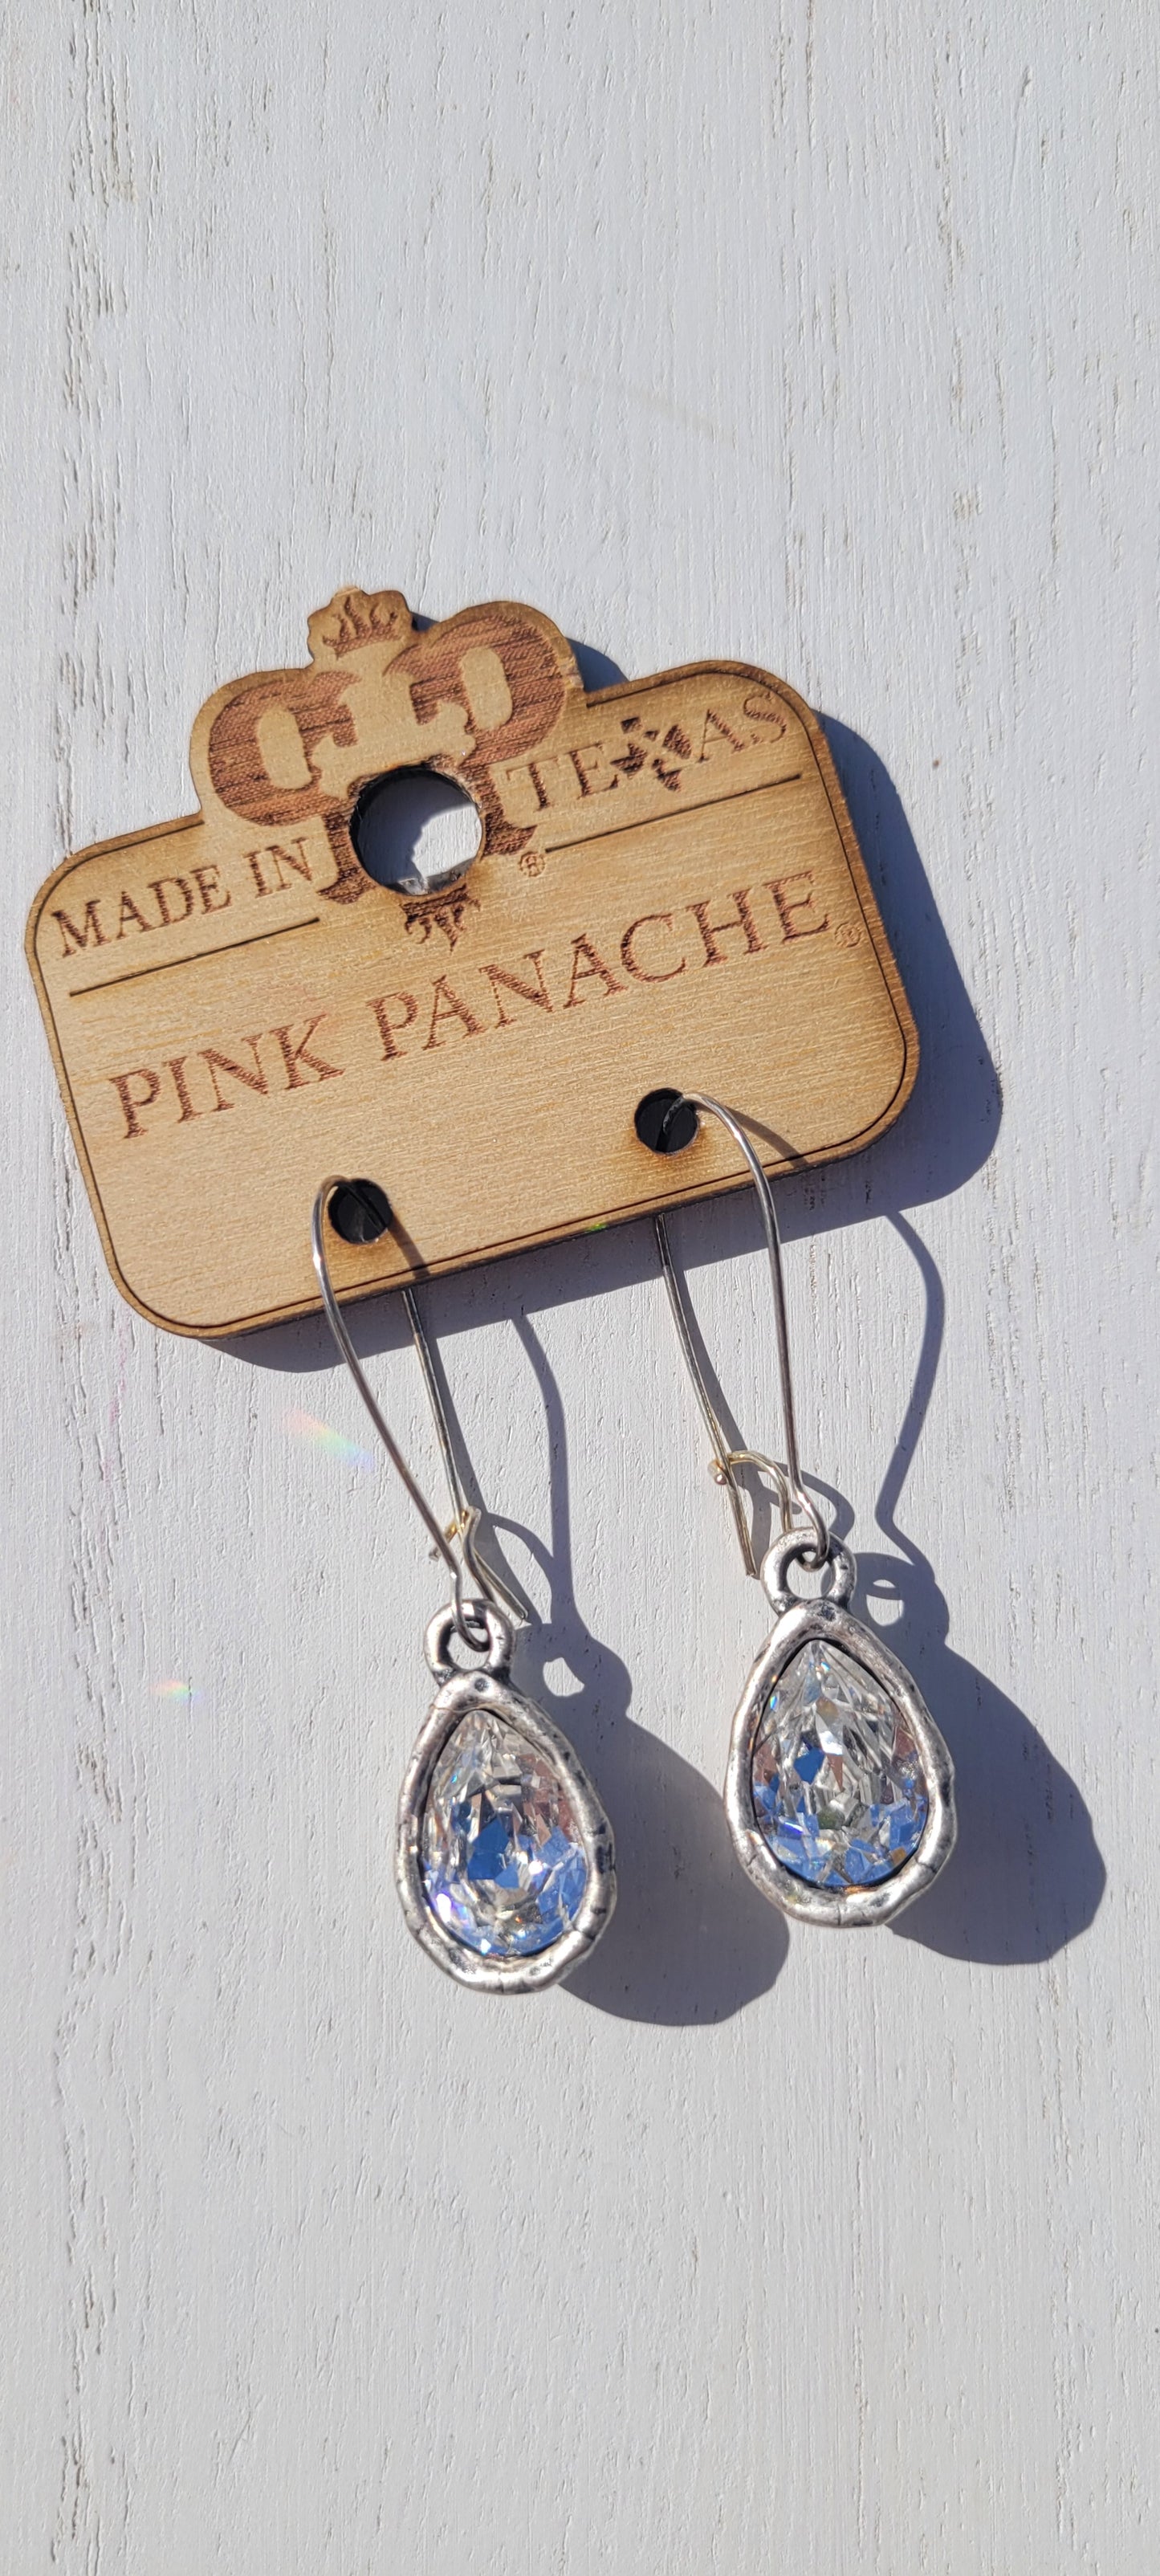 Pink Panache Earrings Color: Small pear/teardrop cushion cut clear crystal on silver kidney wire earring Limited supply!  